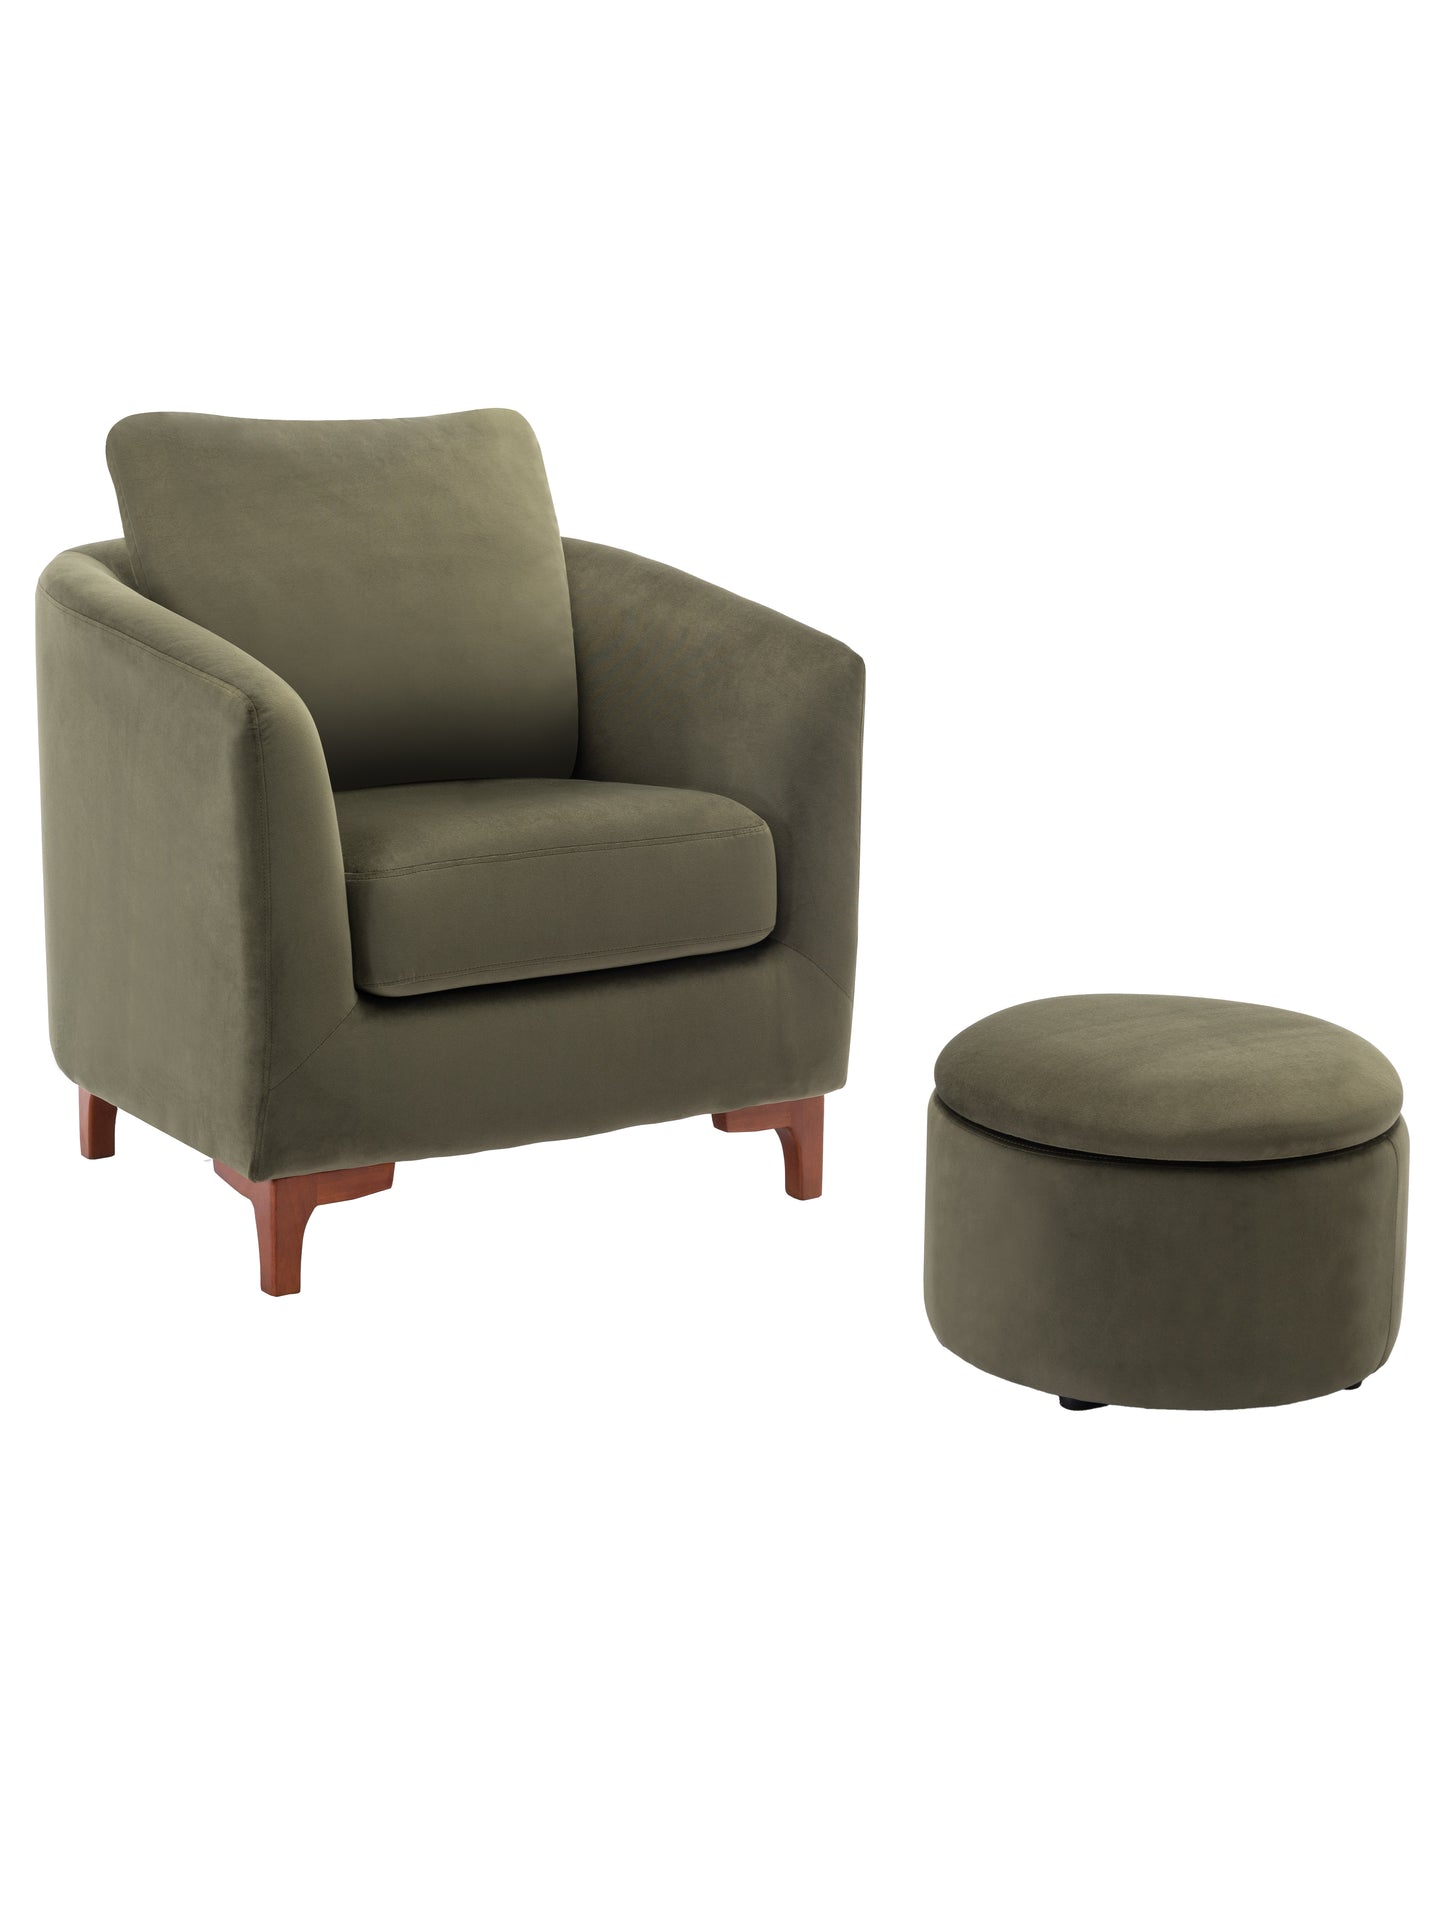 COLAMY Sherpa Accent Chair Reading Chair with Round Storage Ottoman Set